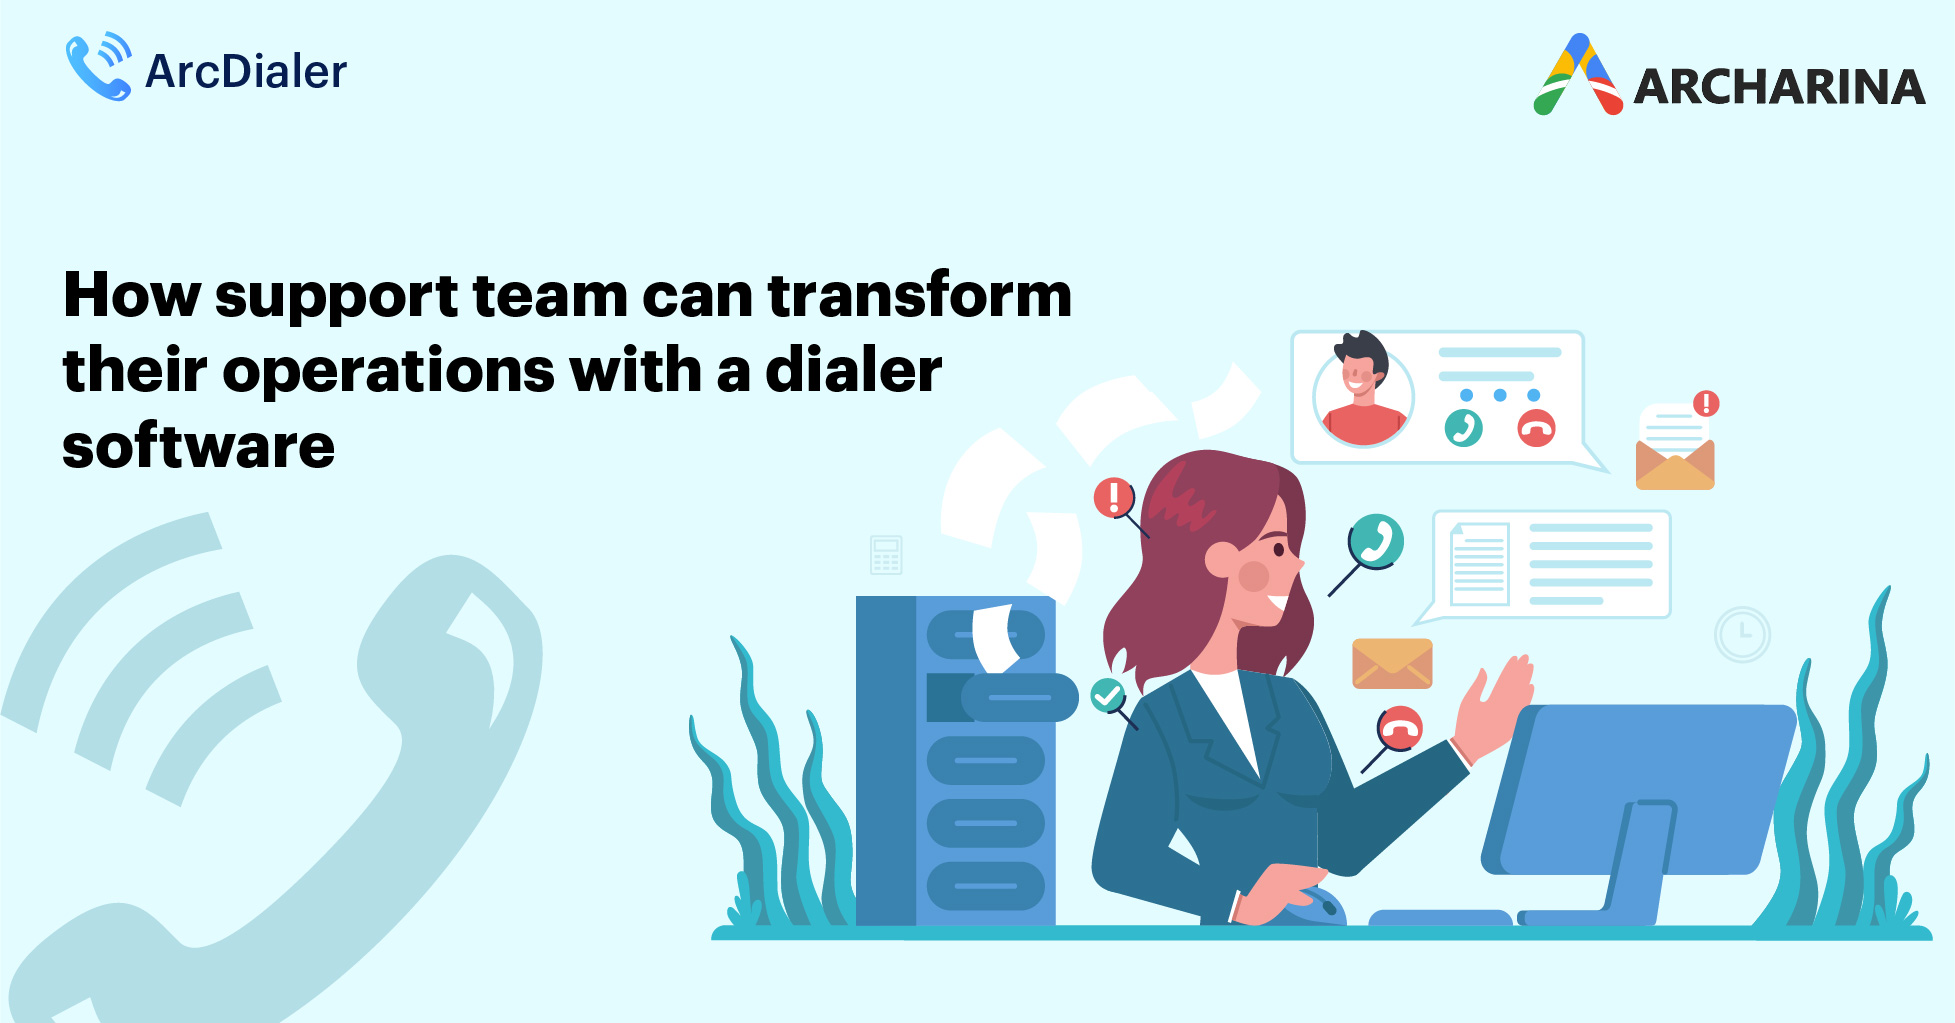 How support team can transform their operations with a dialer software